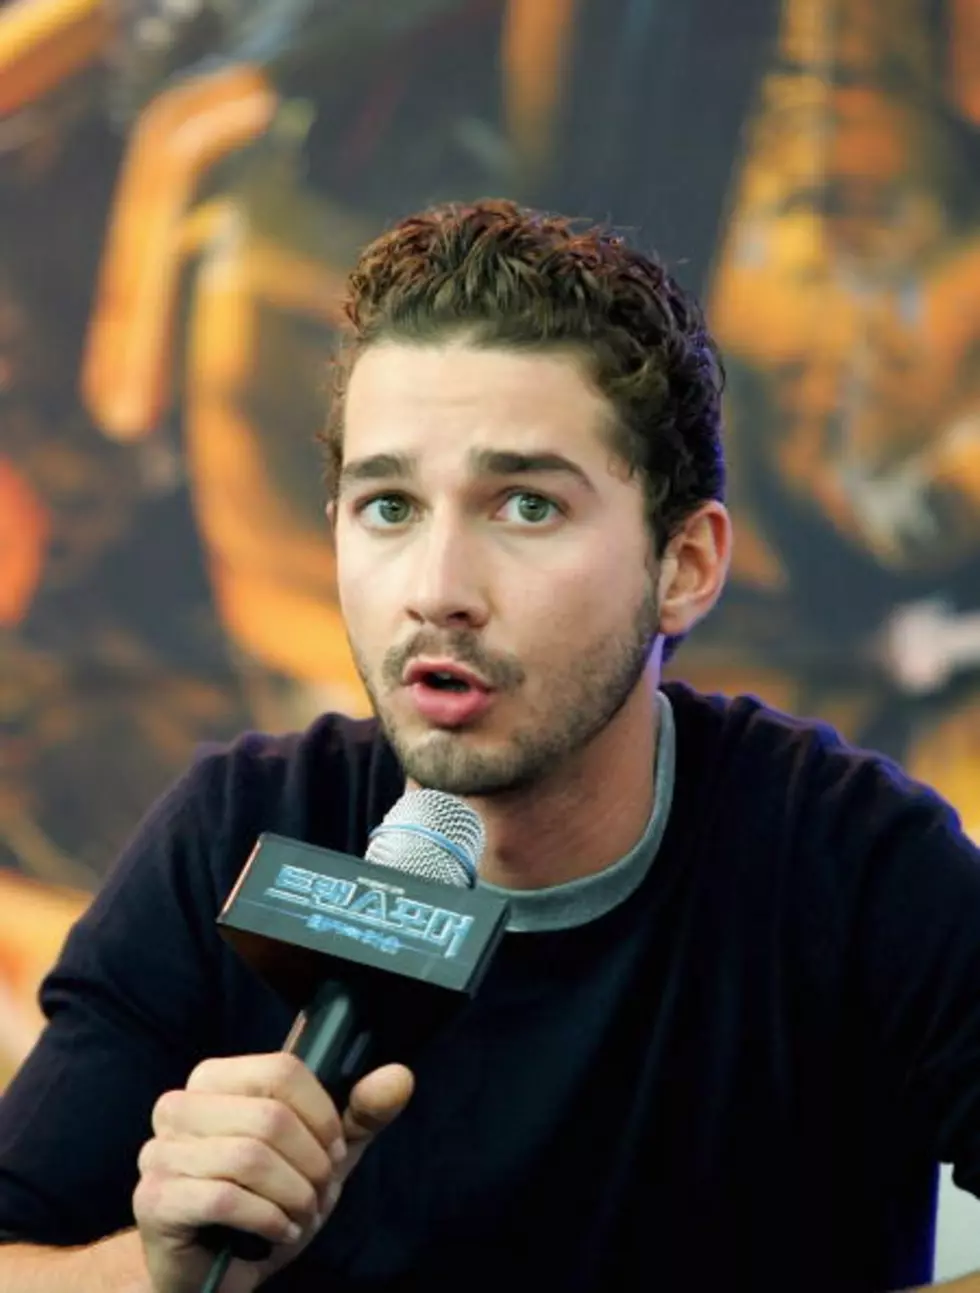 Shia LaBeouf Beaten To The Ground In Fist Fight [VIDEO]